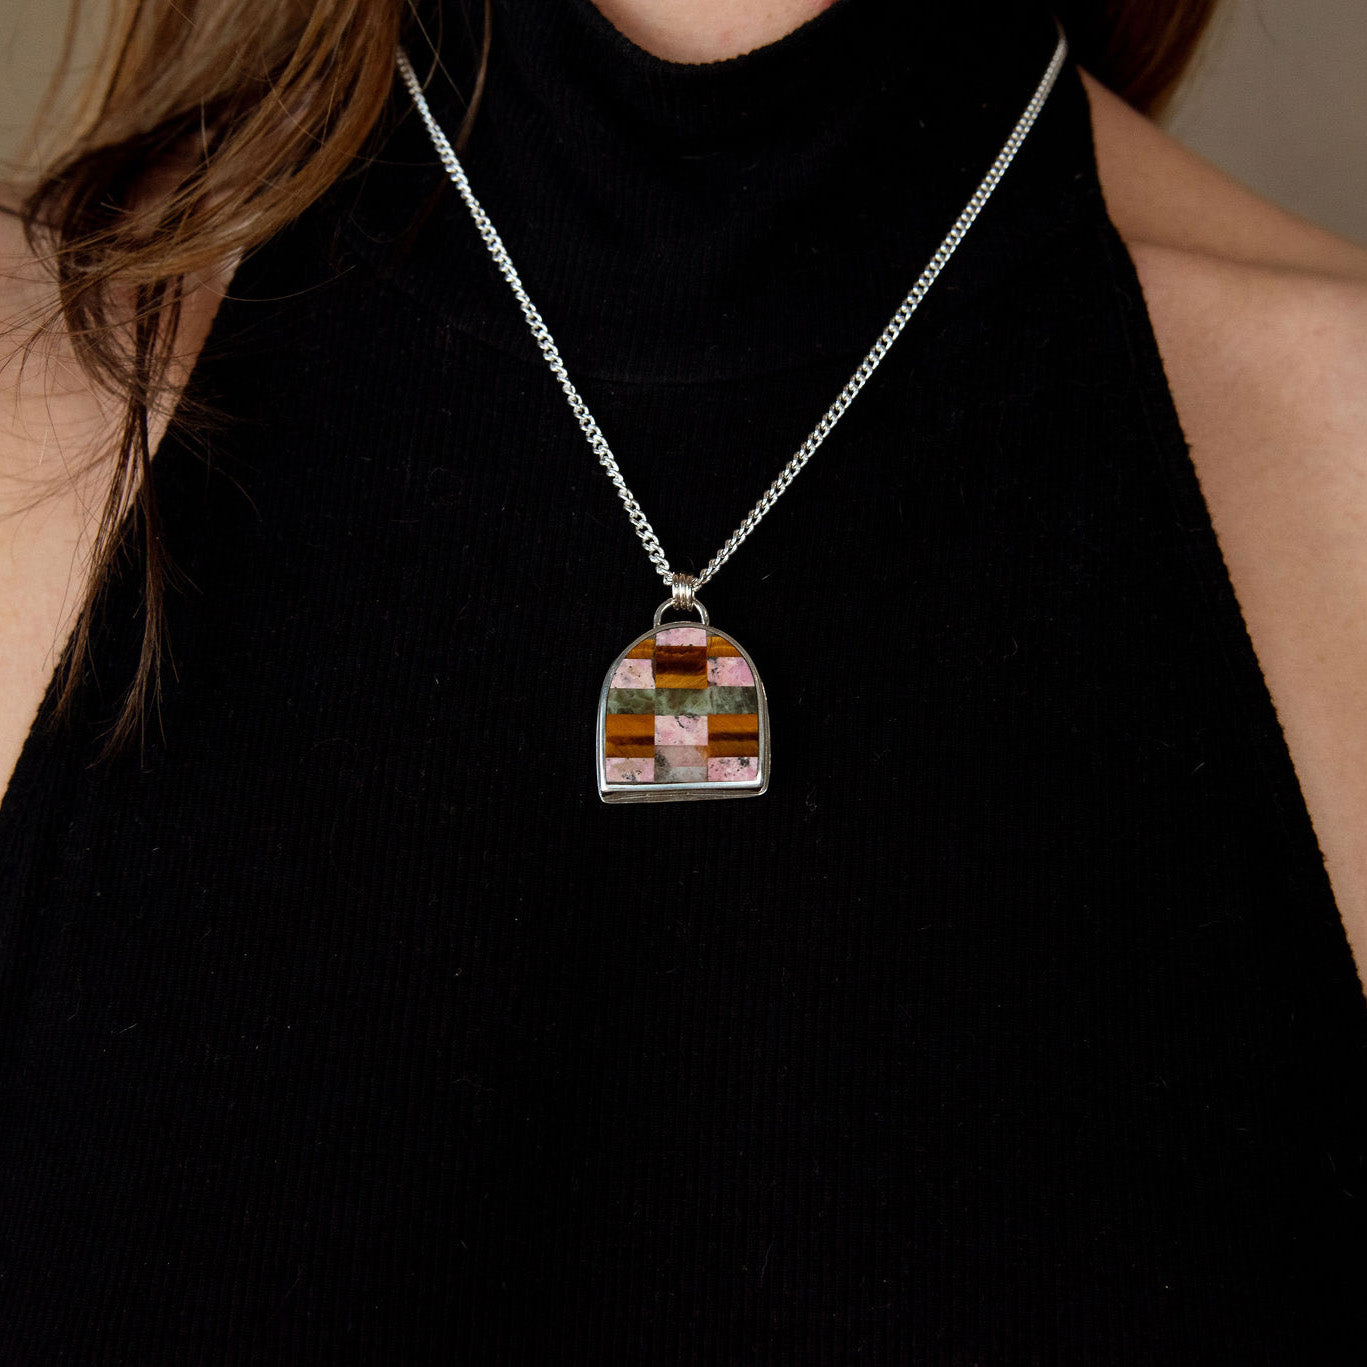 Quirky Patchwork Sterling Silver Necklace